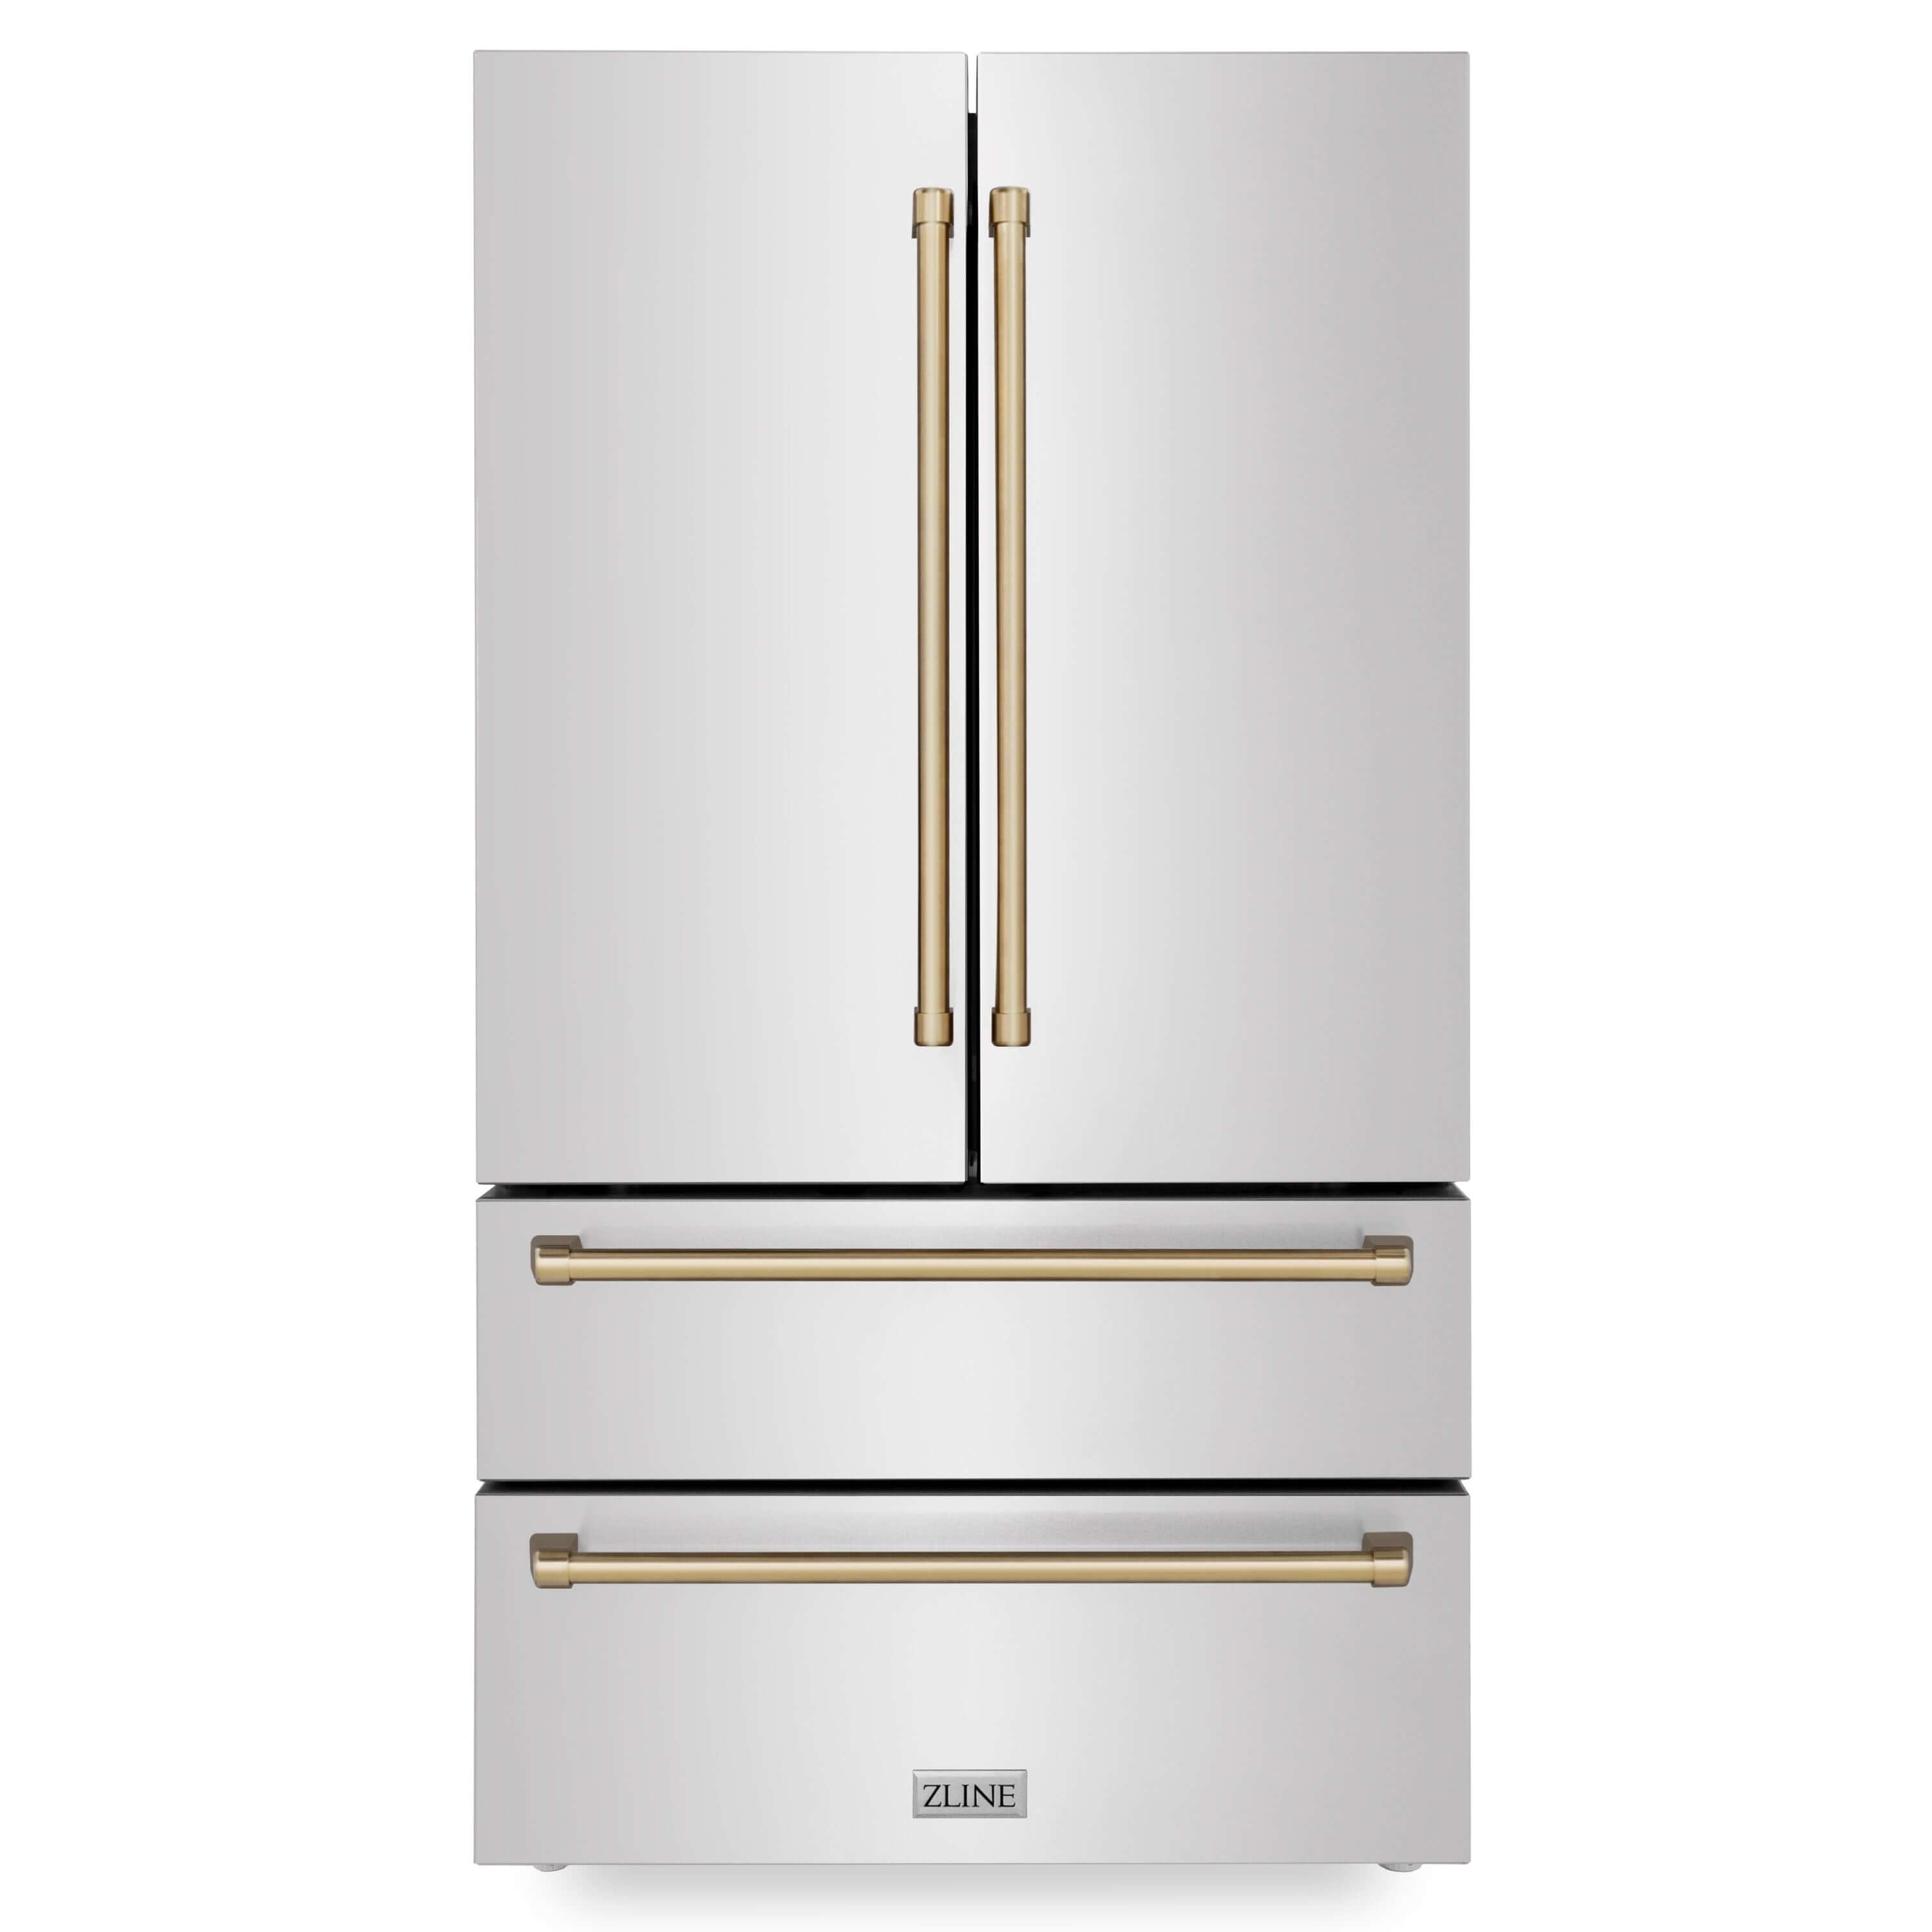 ZLINE 36 in. Autograph Edition French Door Refrigerator in Stainless Steel with Champagne Bronze Accents 